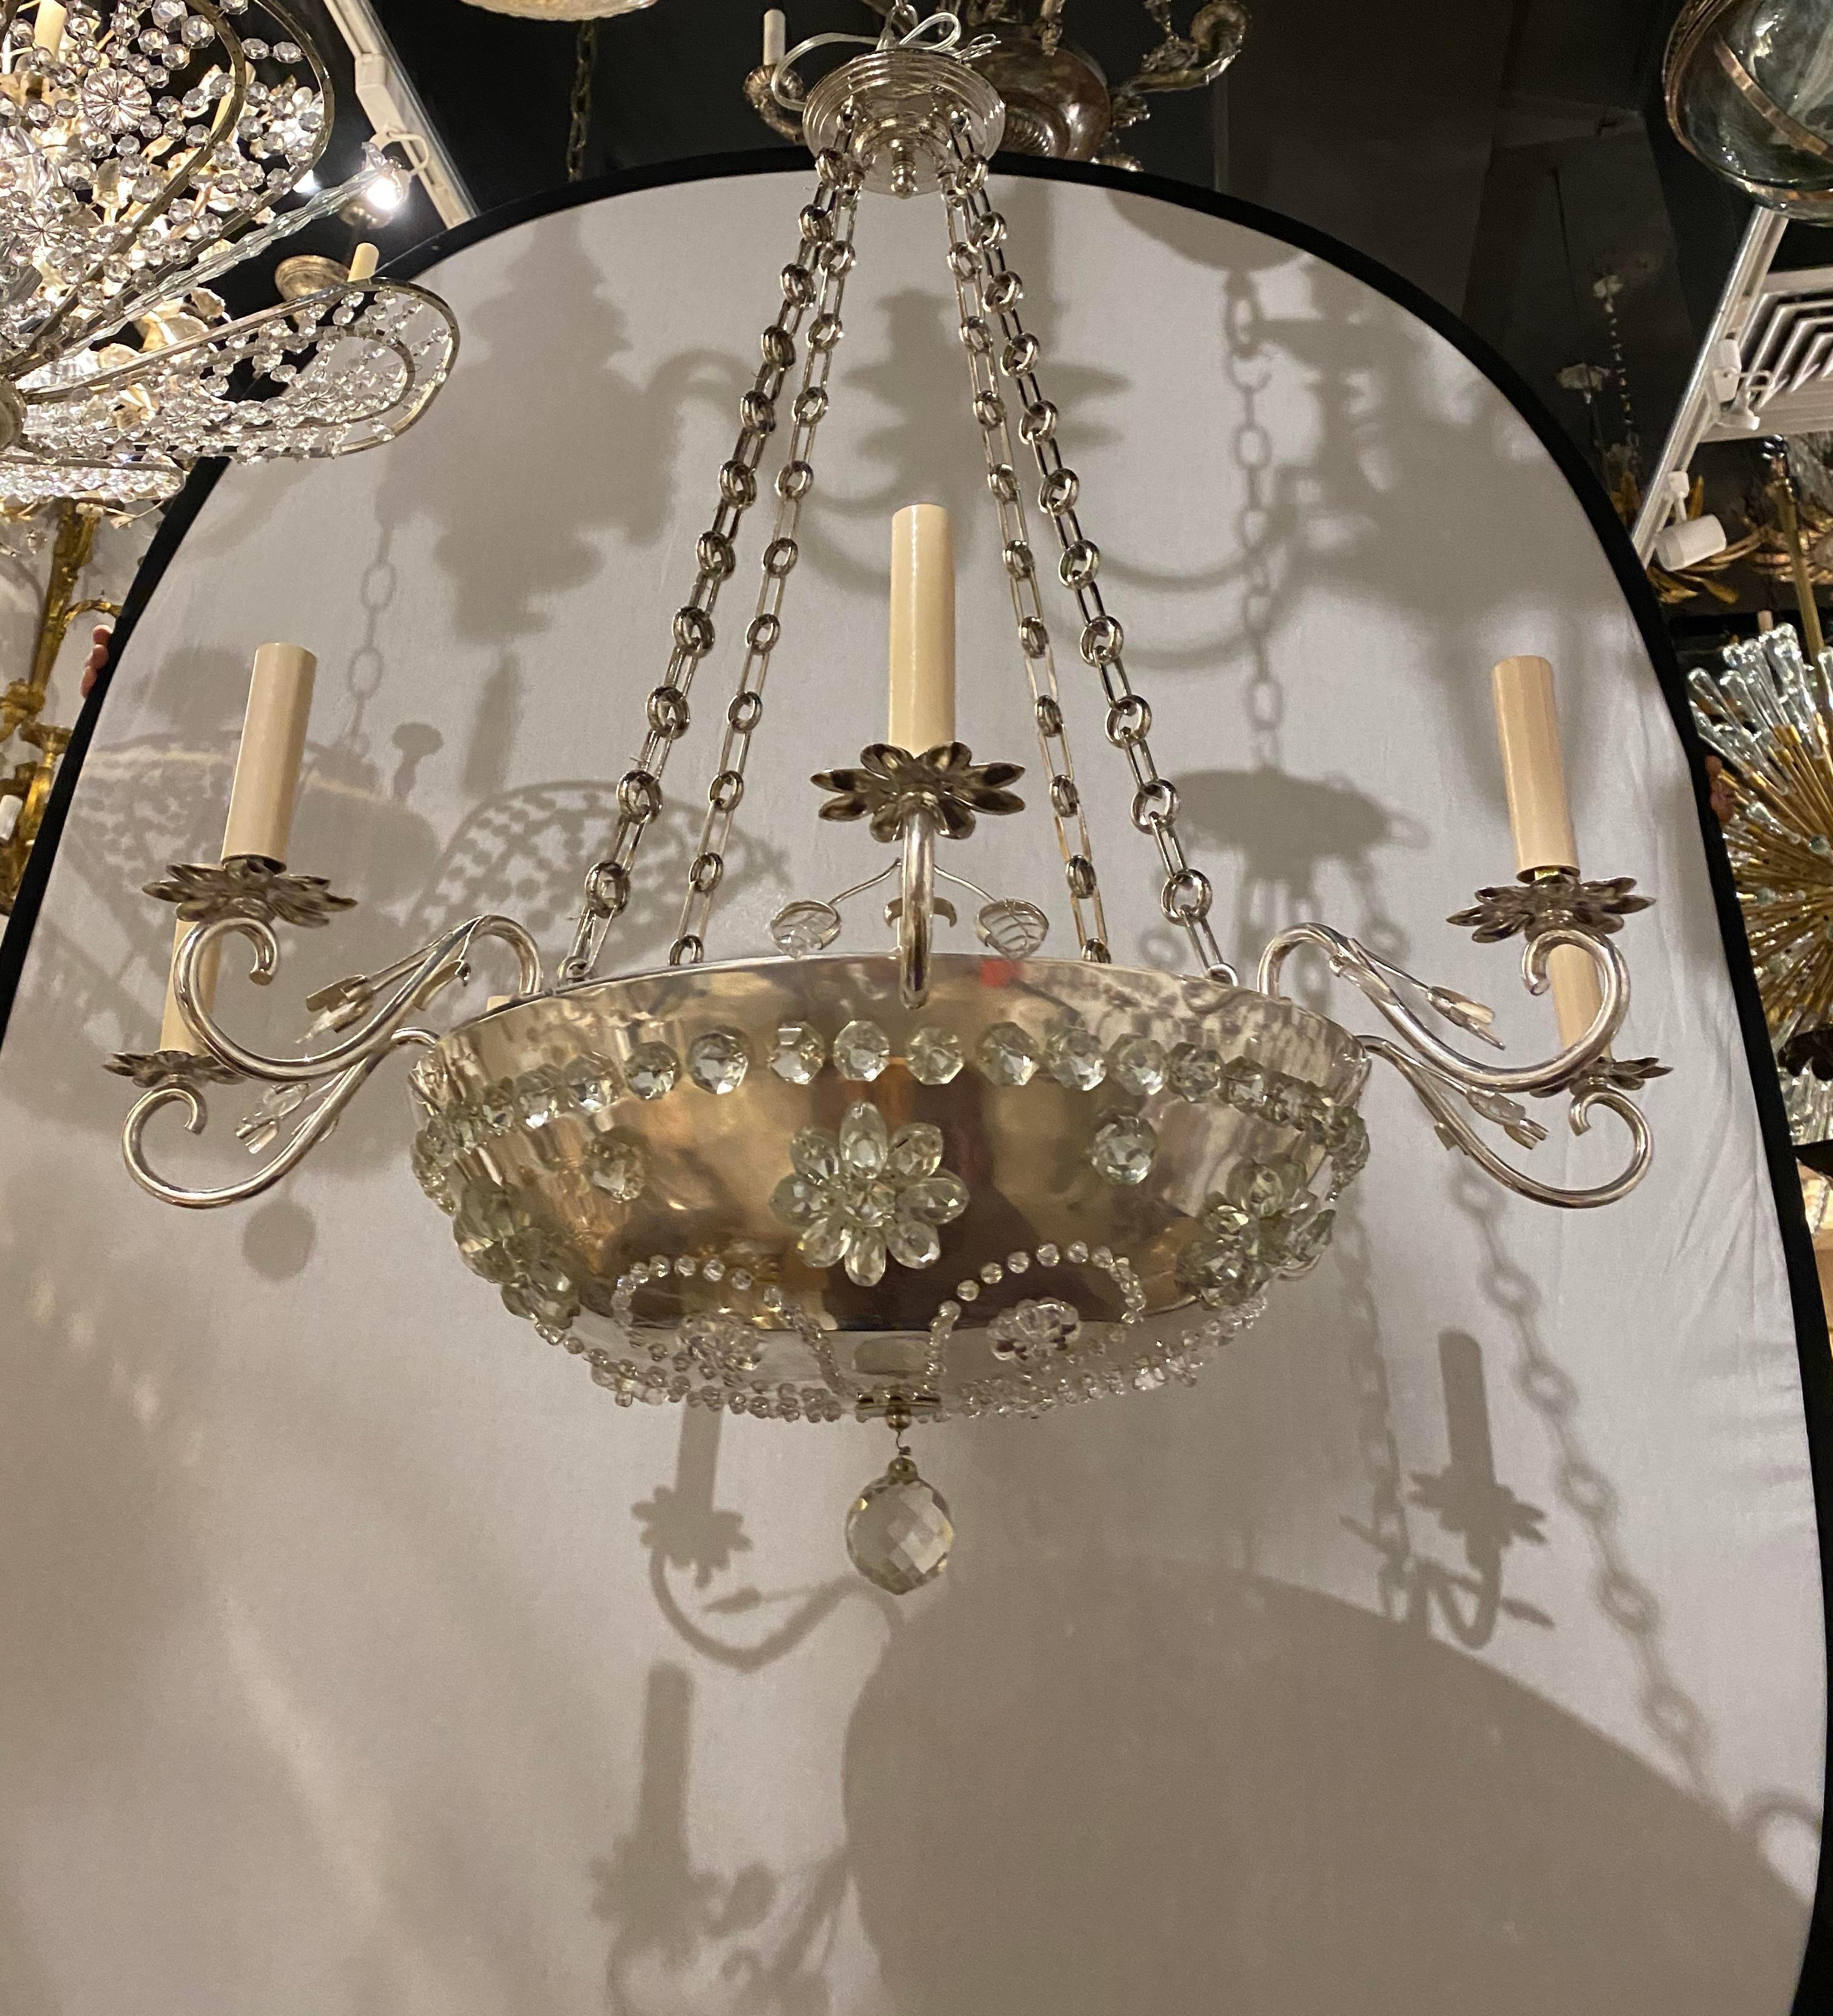 French Provincial 1930's French Silver Plated Light Fixture with Crystal Flowers For Sale